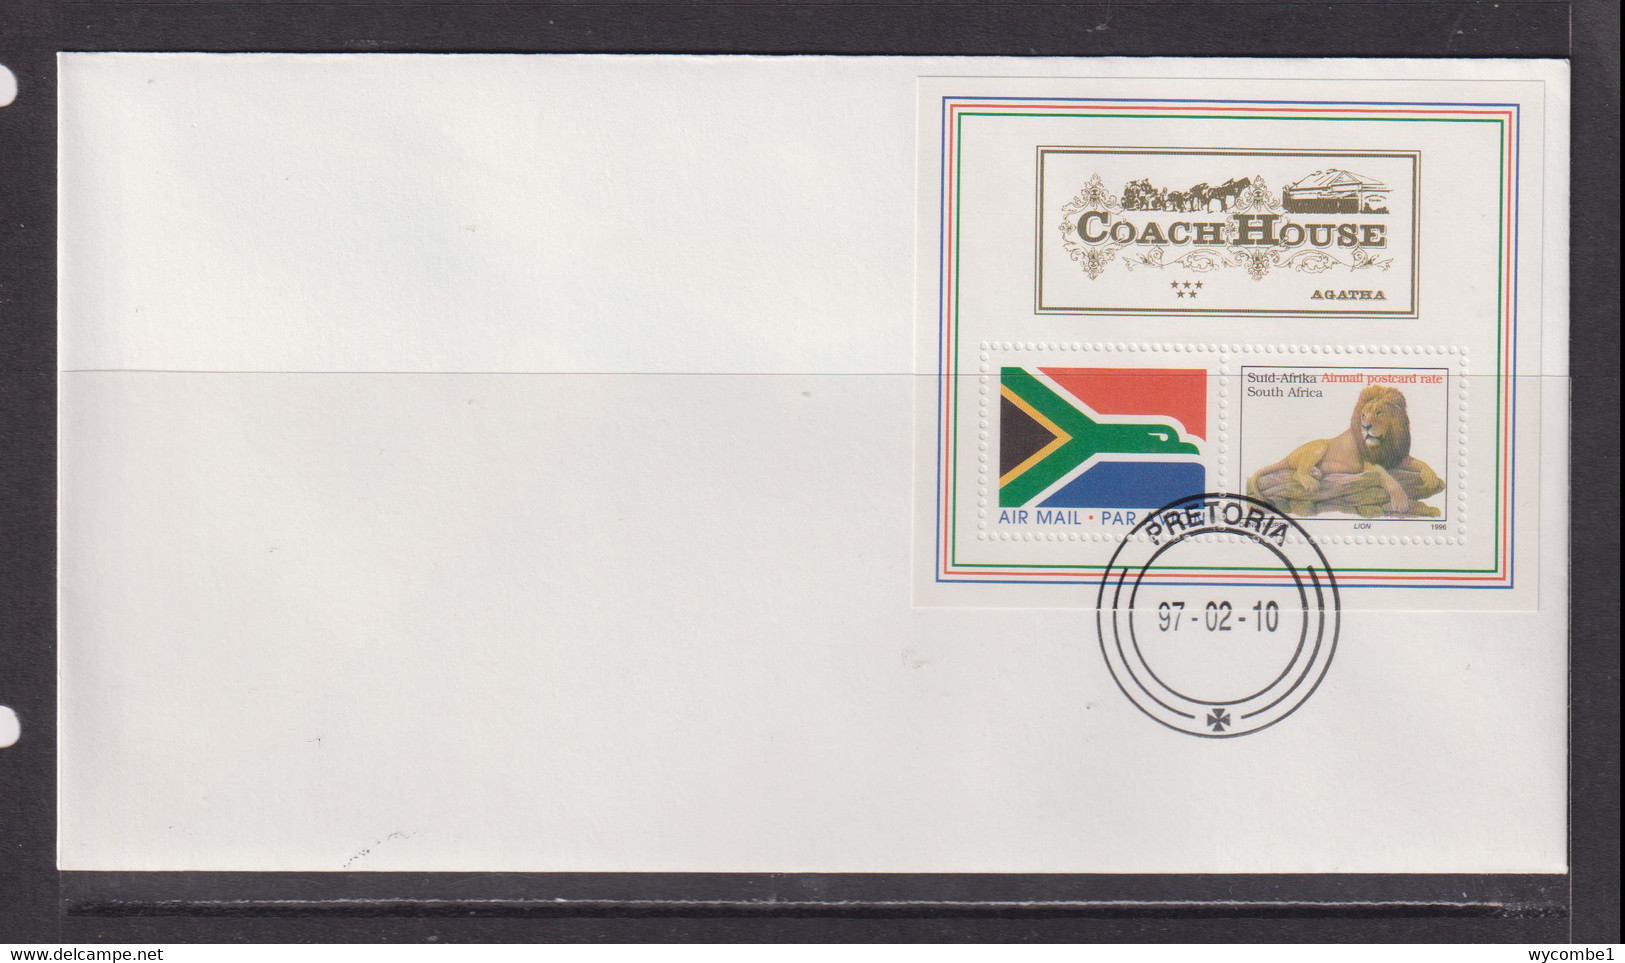 SOUTH AFRICA - 1997 Coach House Lion Miniature Sheet FDC - Covers & Documents